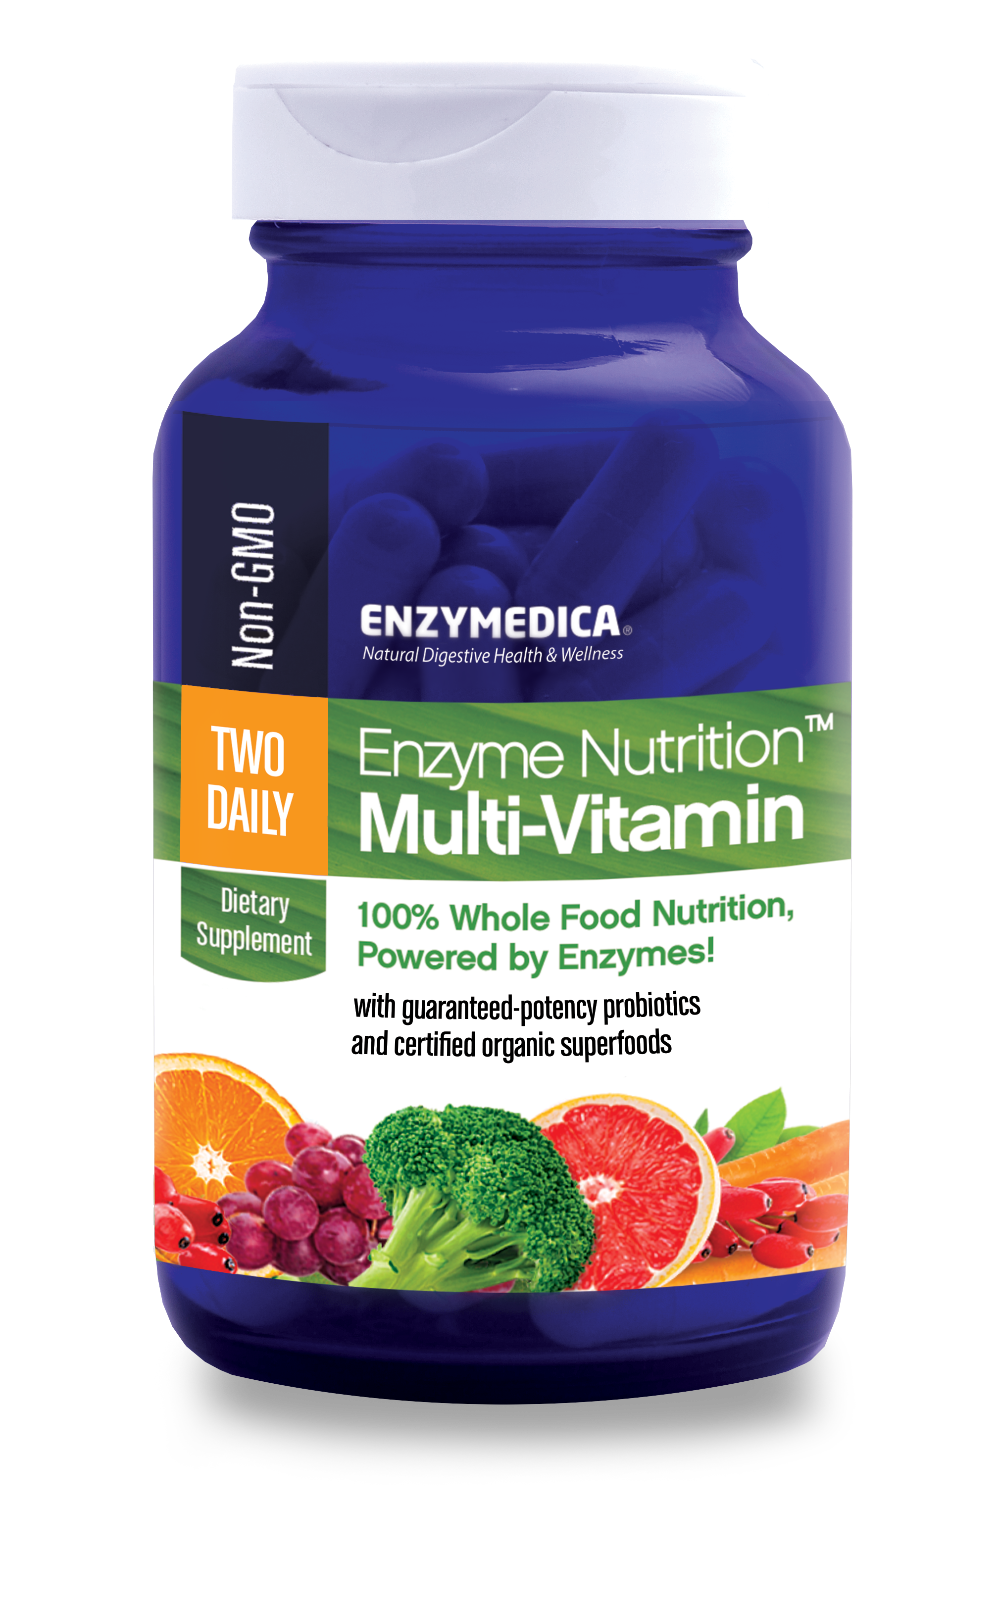 Enzymedica Enzyme Nutrition™ Multi-Vitamin Two Daily